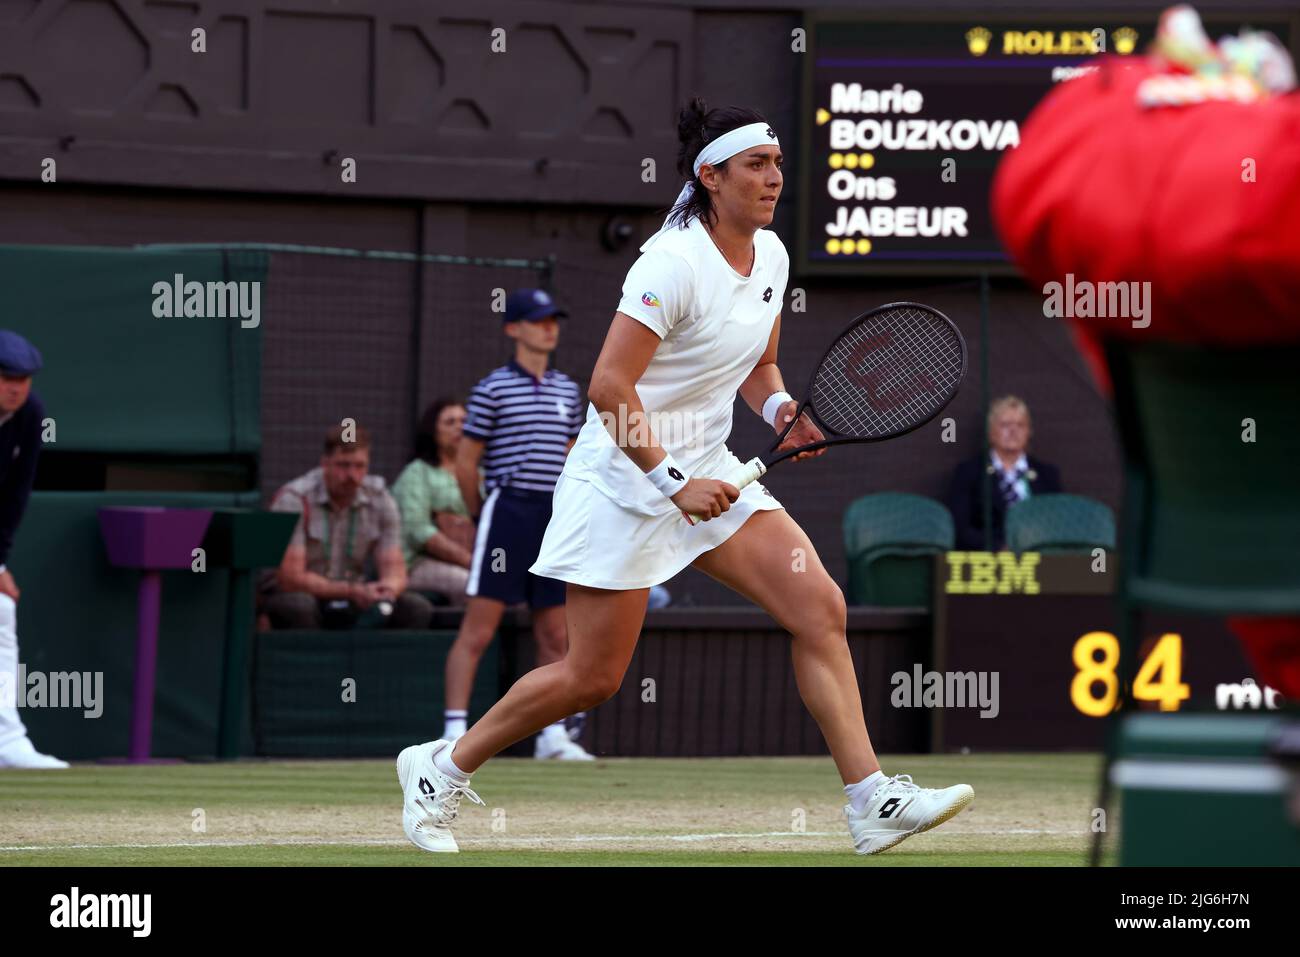 5 July 2022, All England Lawn Tennis Club, Wimbledon, London, United Kingdom:  Tunisia's Ons Jabeur during her quarterfinal match against Marie Bouzkova of the Czech Republic at Wimbledon today.  Jabeur won the match to advance to the semi finals. Stock Photo